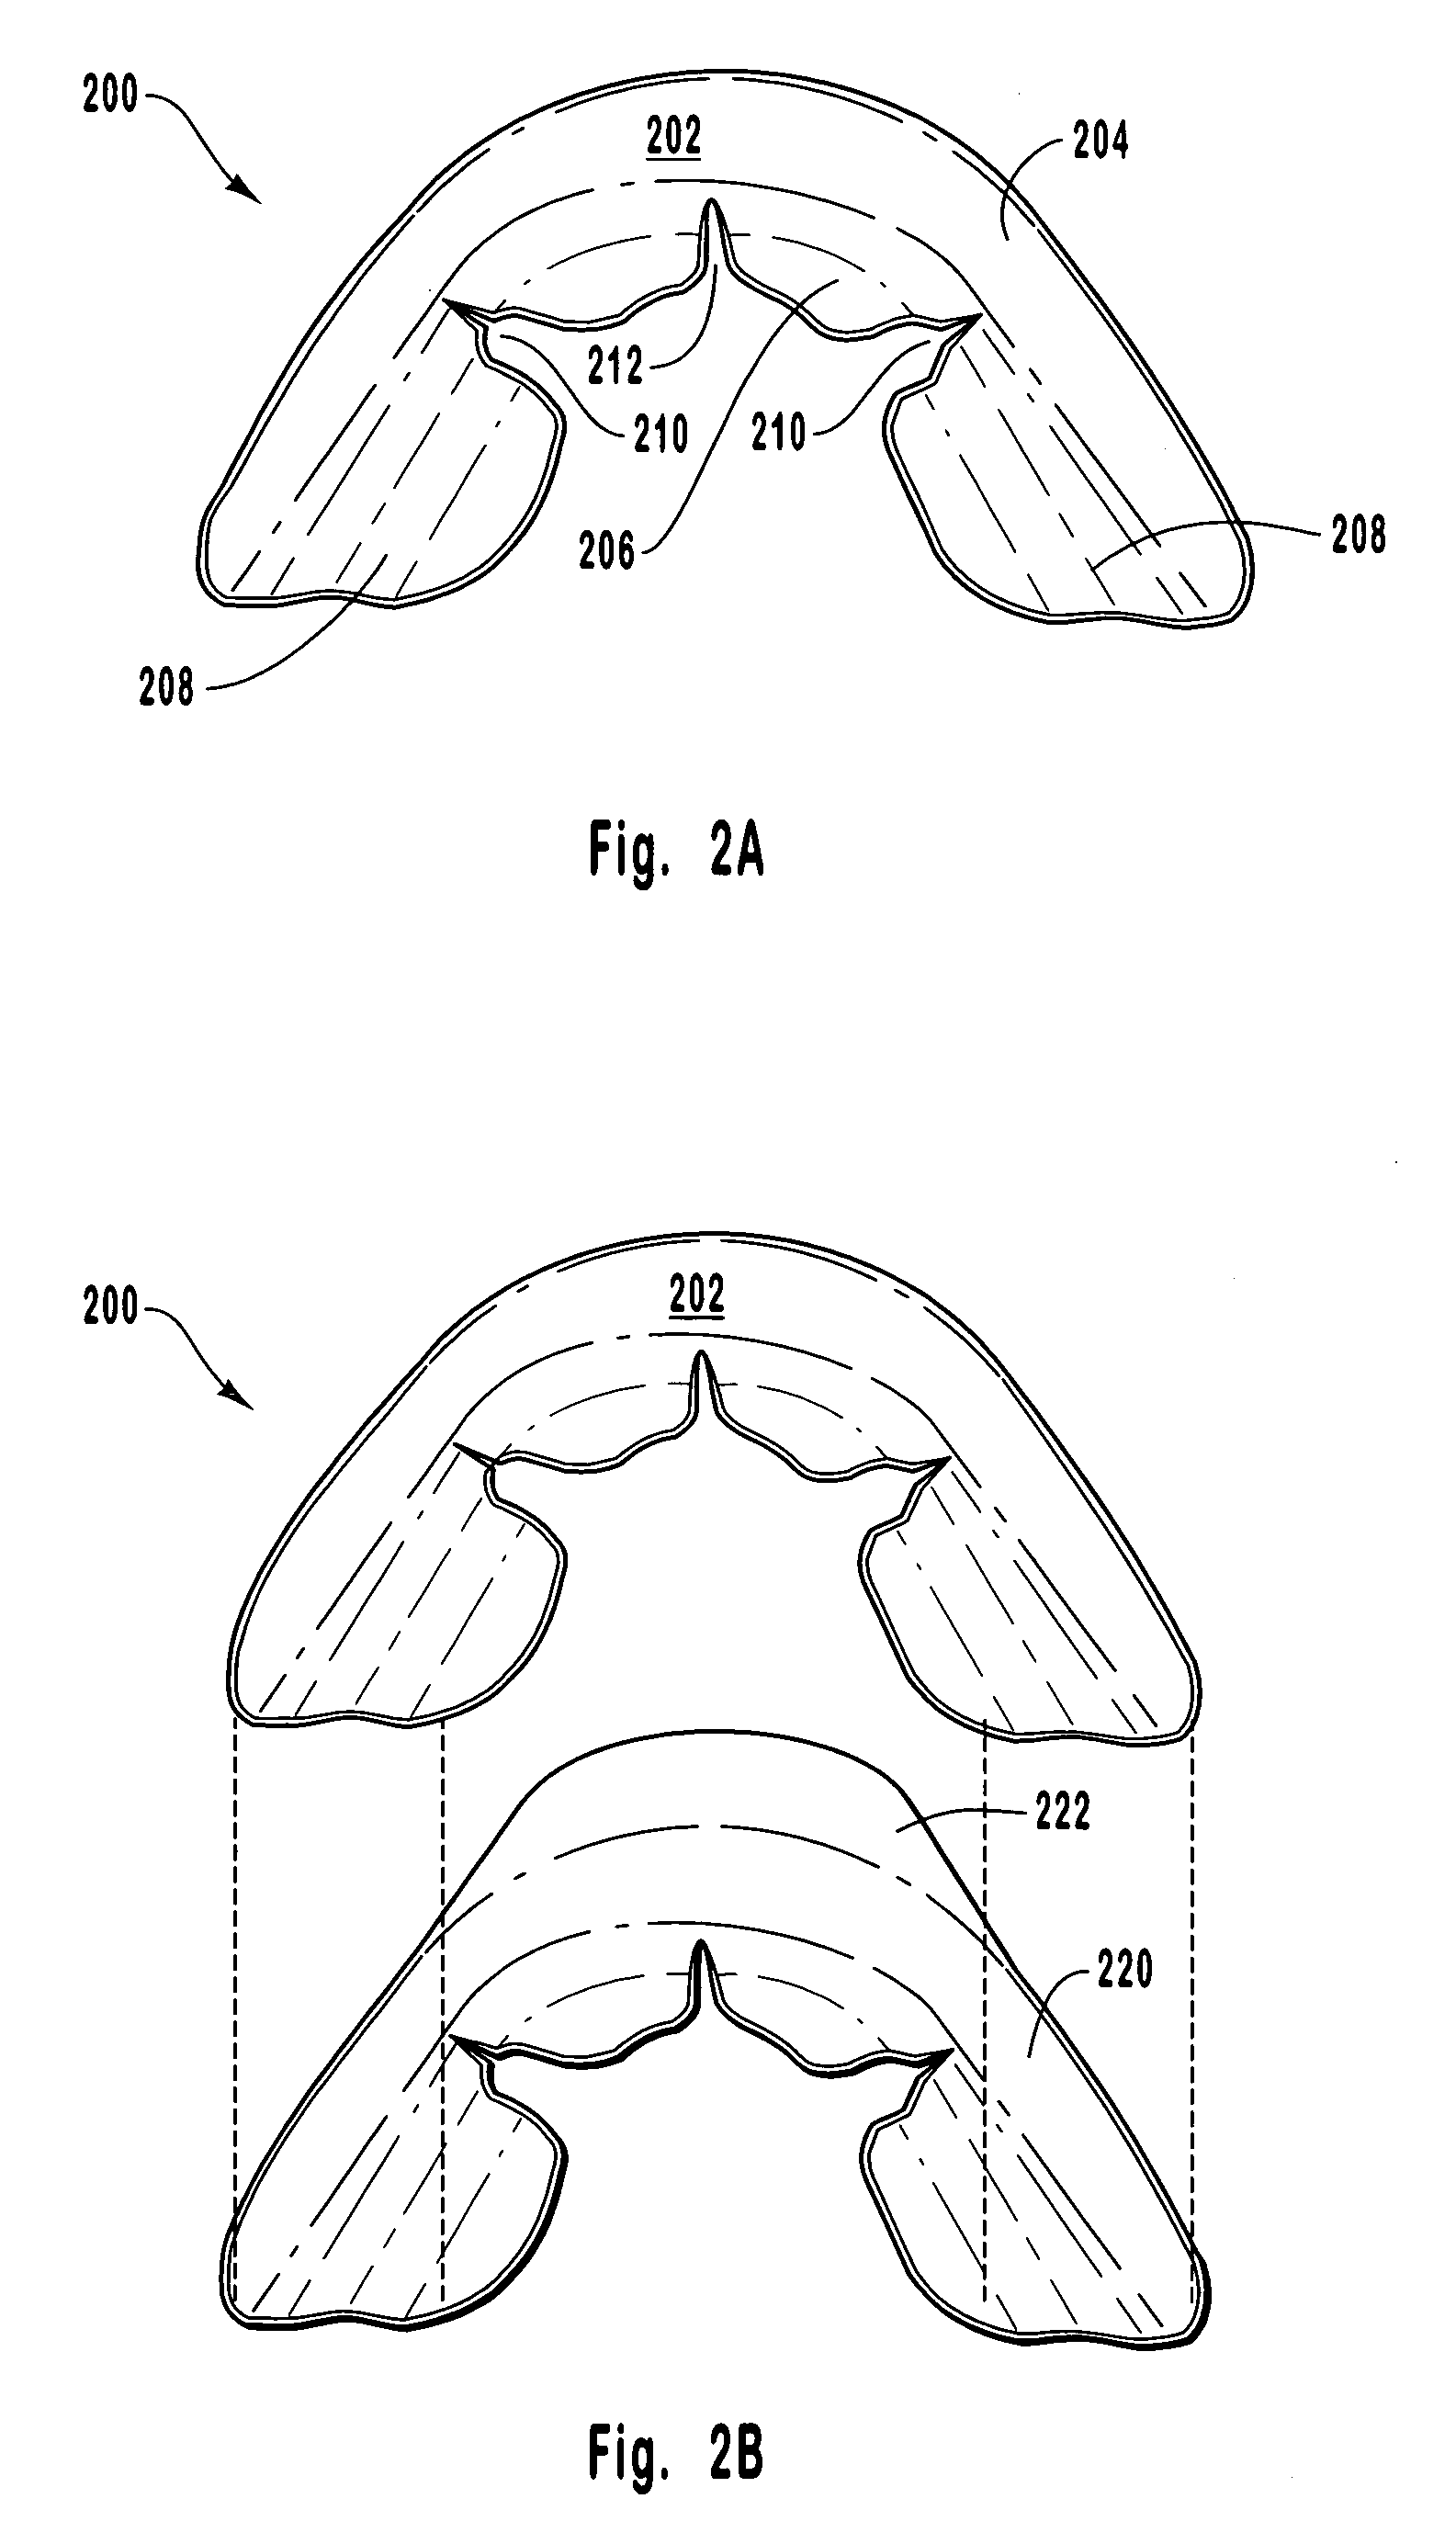 Dental treatment tray comprising a plasticized resin for improved moldability and conformability